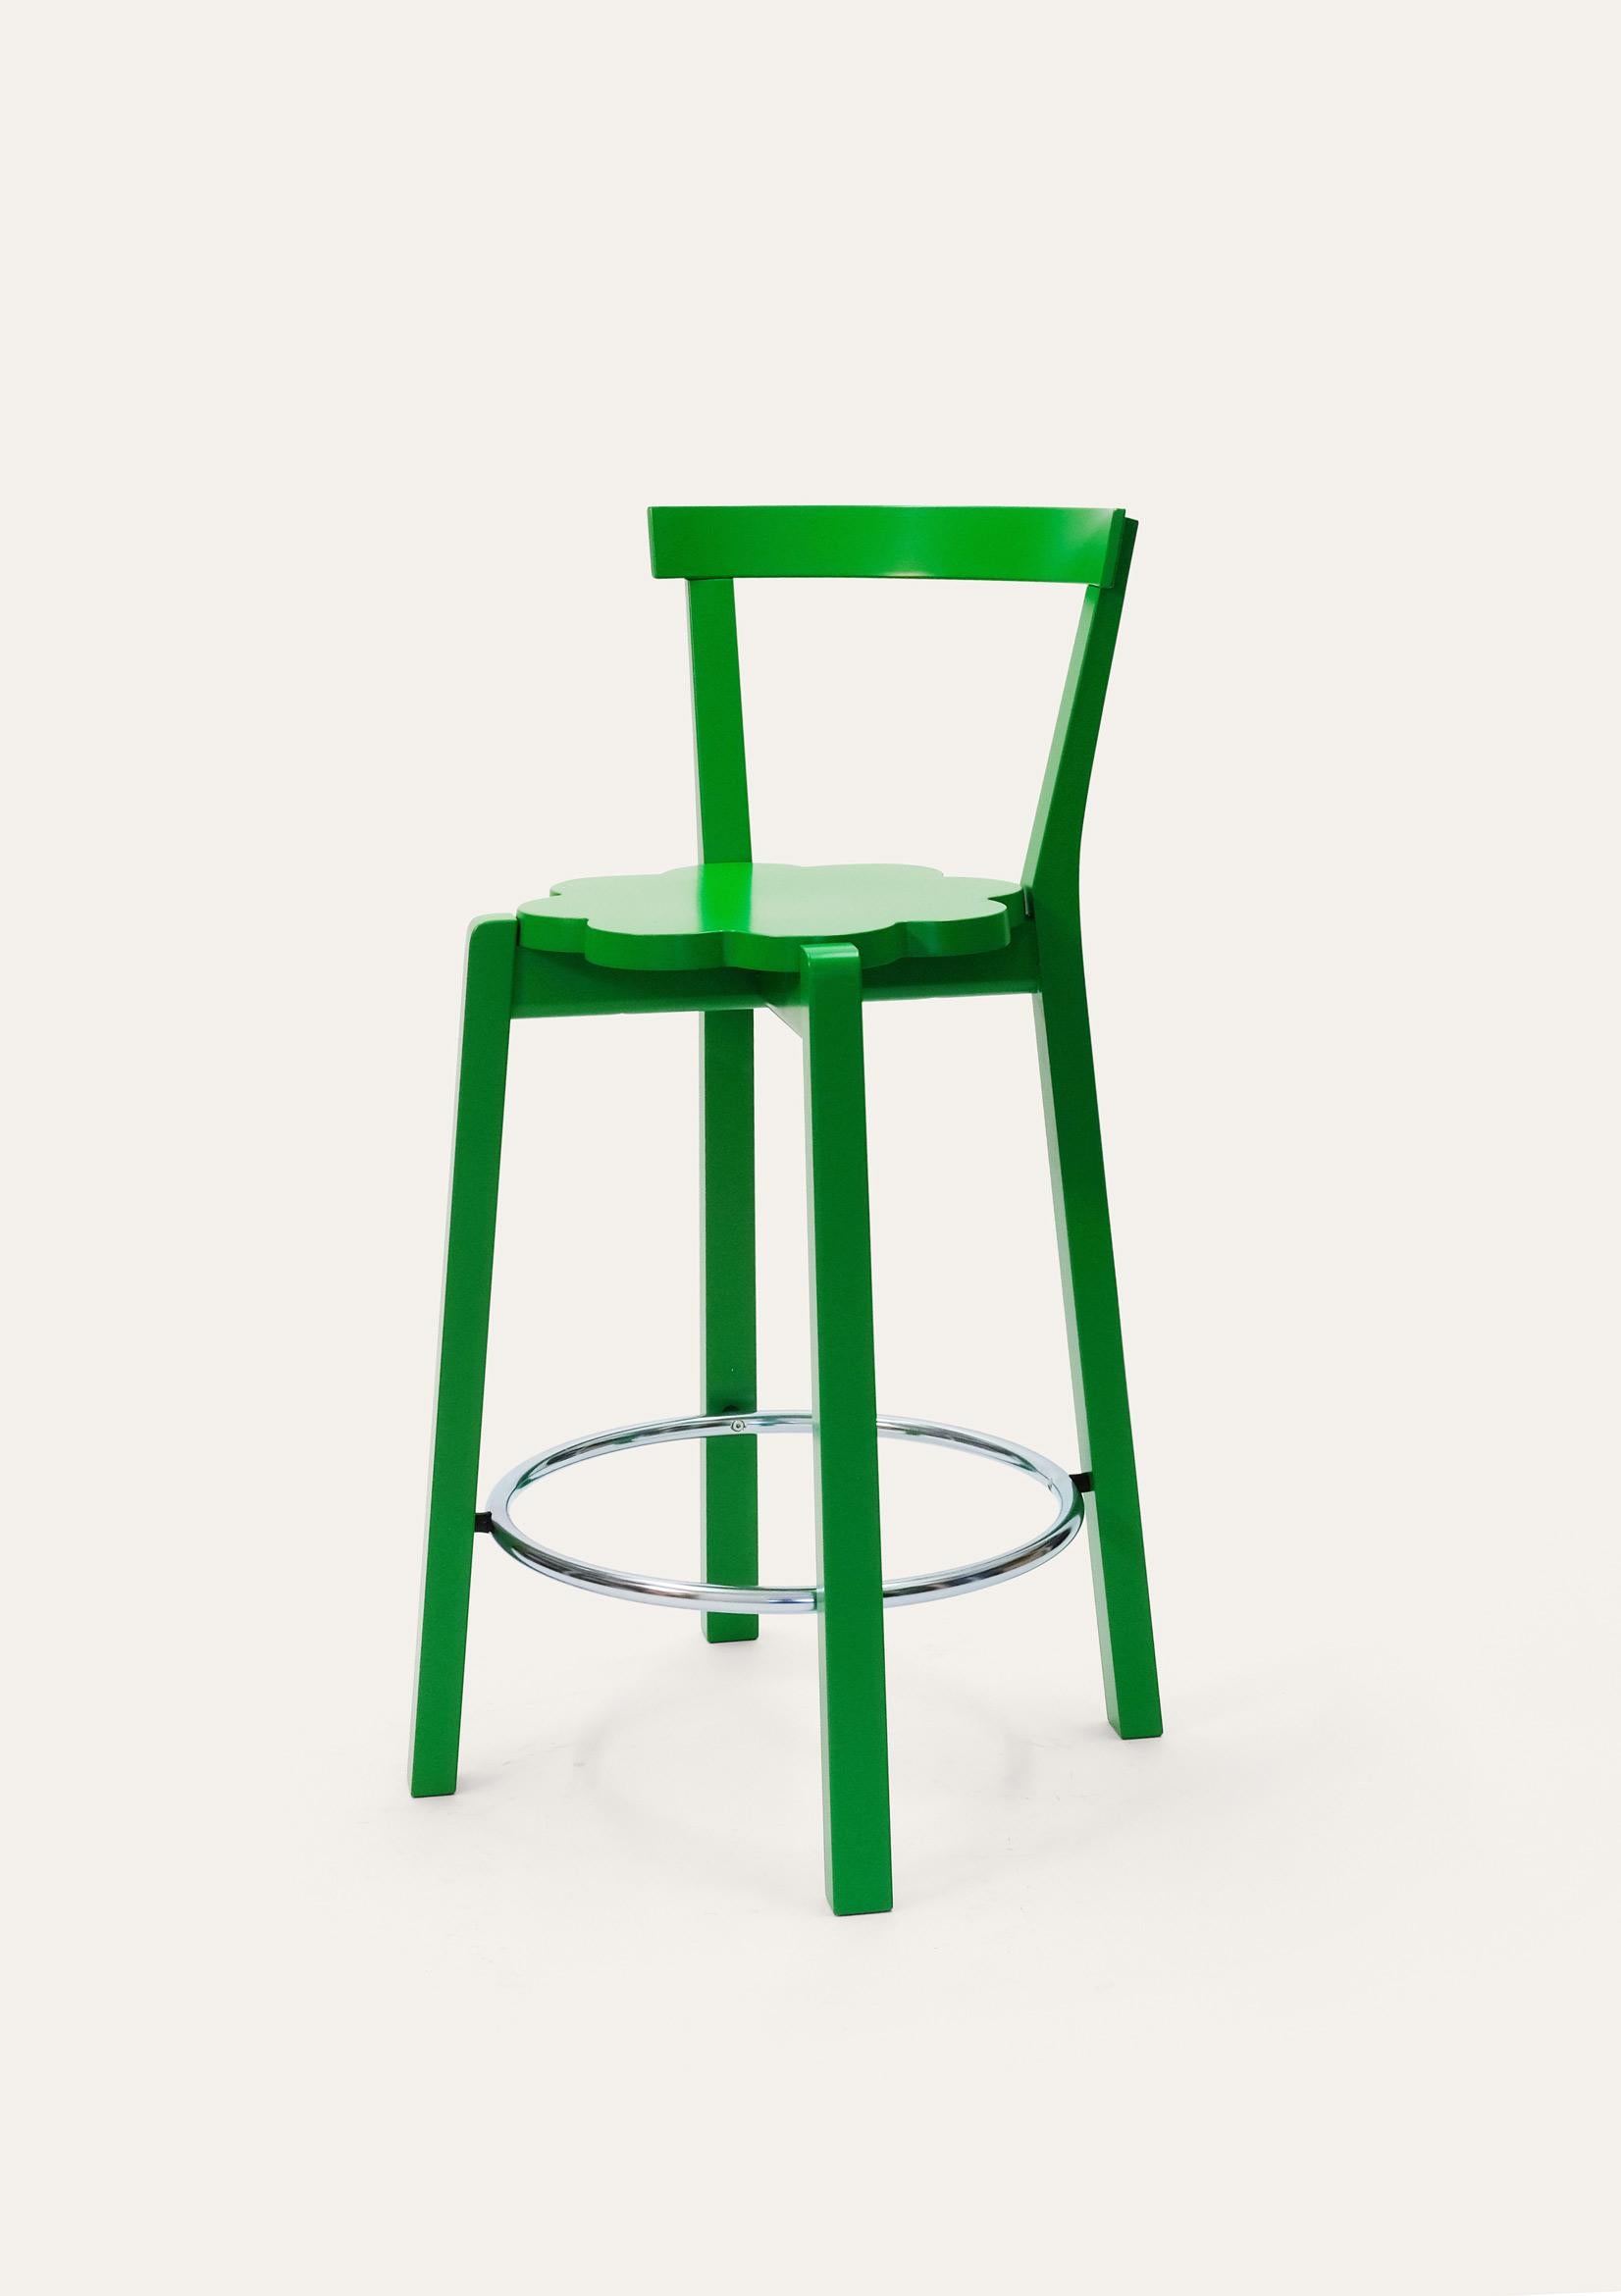 Green blossom bar chair by Storängen Design
Dimensions: D 48 x W 43 x H 92 x SH 65 cm
Materials: birch wood, steel.
Available in other colors and sizes. With or without backrest.

A small and neat stackable chair, which works well round tables